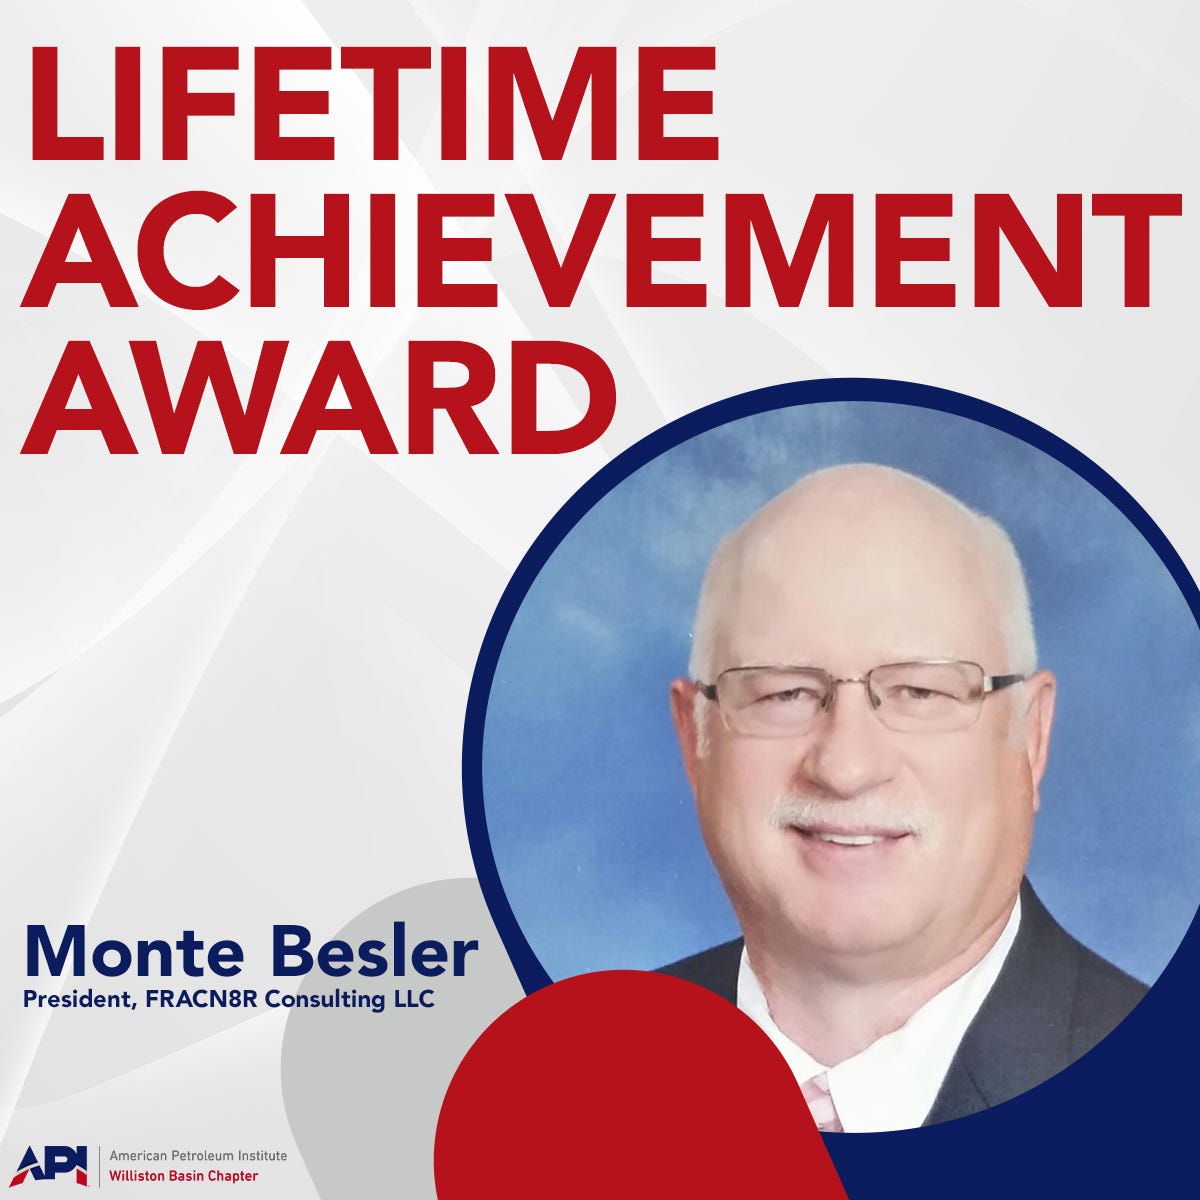 May be an image of 1 person and text that says 'LIFETIME ACHIEVEMENT AWARD Monte Besler President, FRACN8R Consulting LLC API Williston Basin Chapter American Petroleum nstitute'